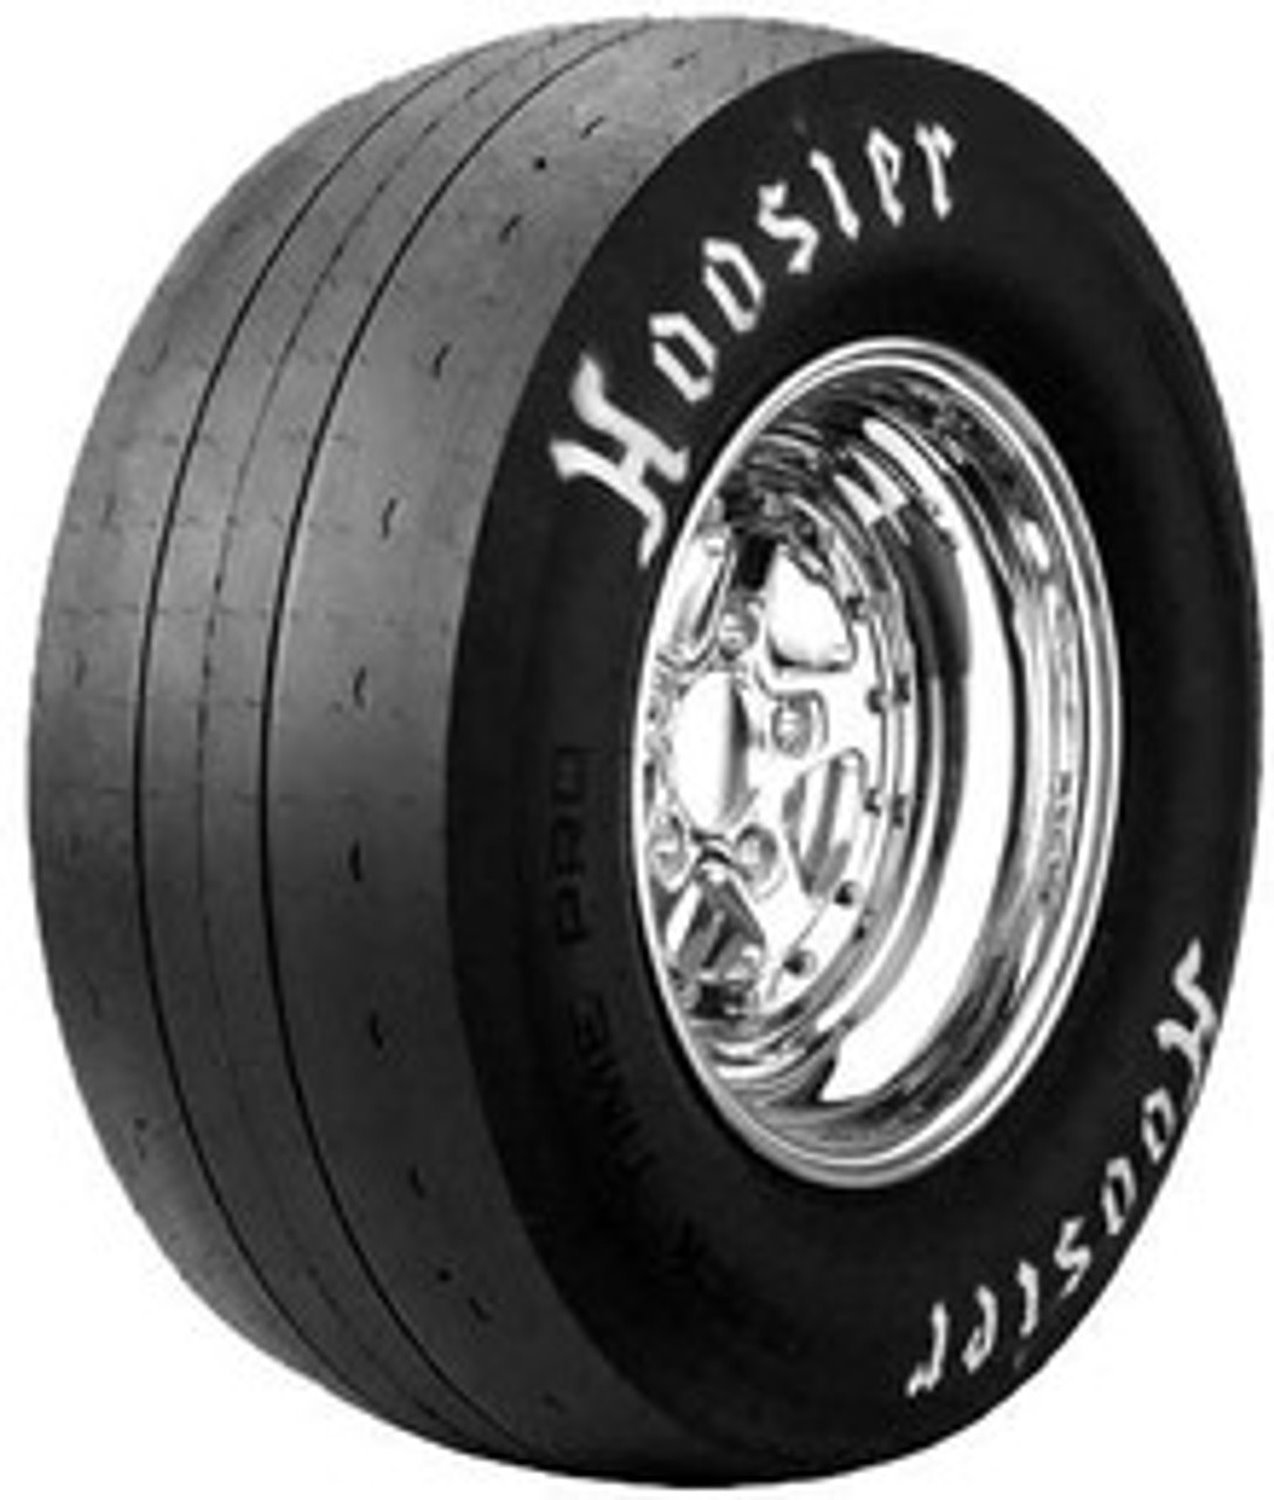 17604QTPRO Quick Time Pro D.O.T. Drag Racing Tire [28 in. x 11.50 in. -17 in. LT]